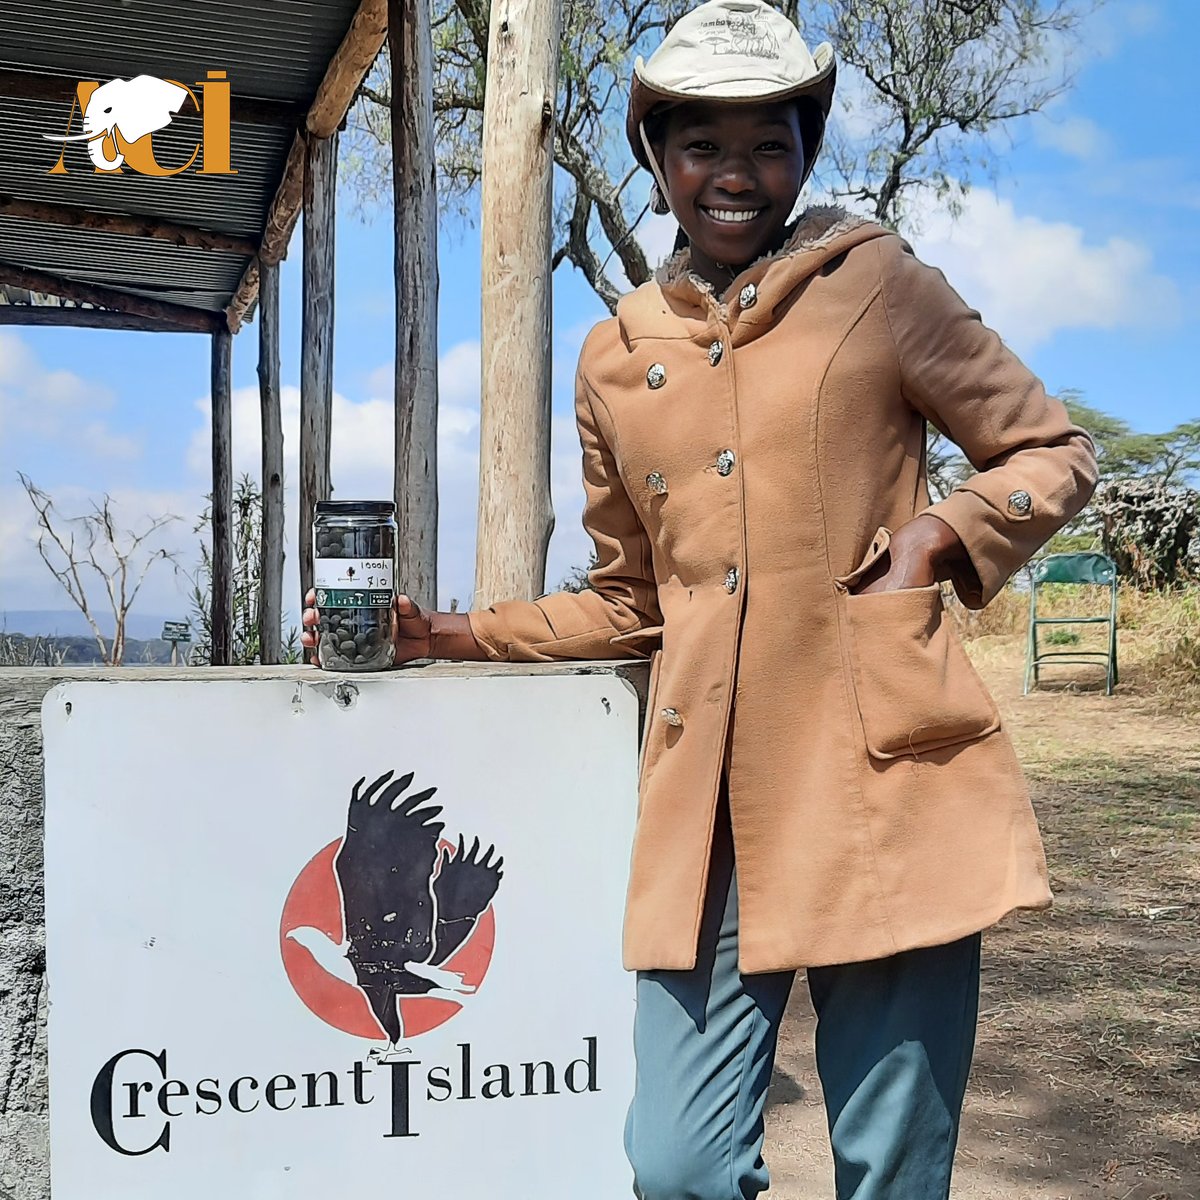 Meet Faith, a guide at Crescent Island Naivasha, who told us about the importance of planting acacia seeds while you visit the island , as @KiiruWinnie said in her remarks at @APA_Congress . We need more #WomeninConservation #girlpower #education #Trees4betterlives